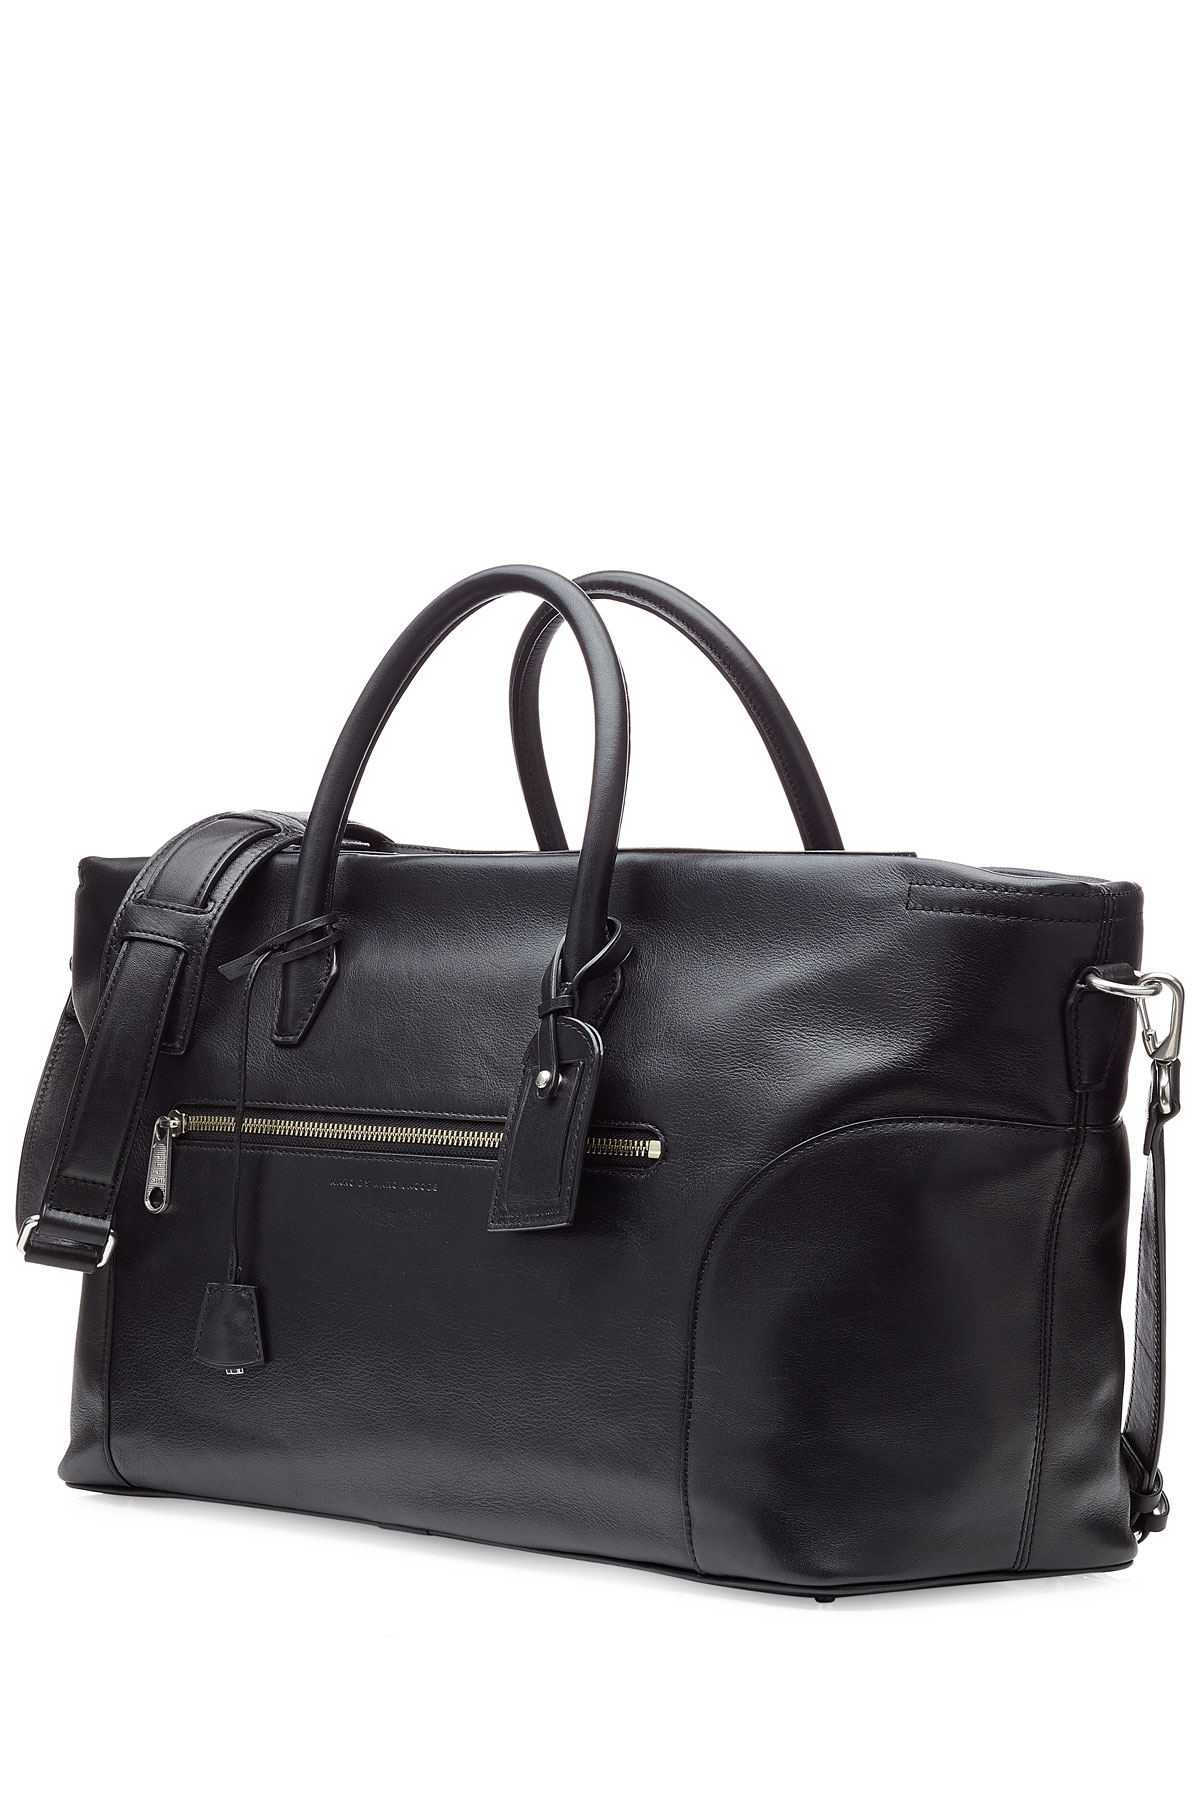 Lyst - Marc By Marc Jacobs Tony Leather Weekender Bag in Black for Men